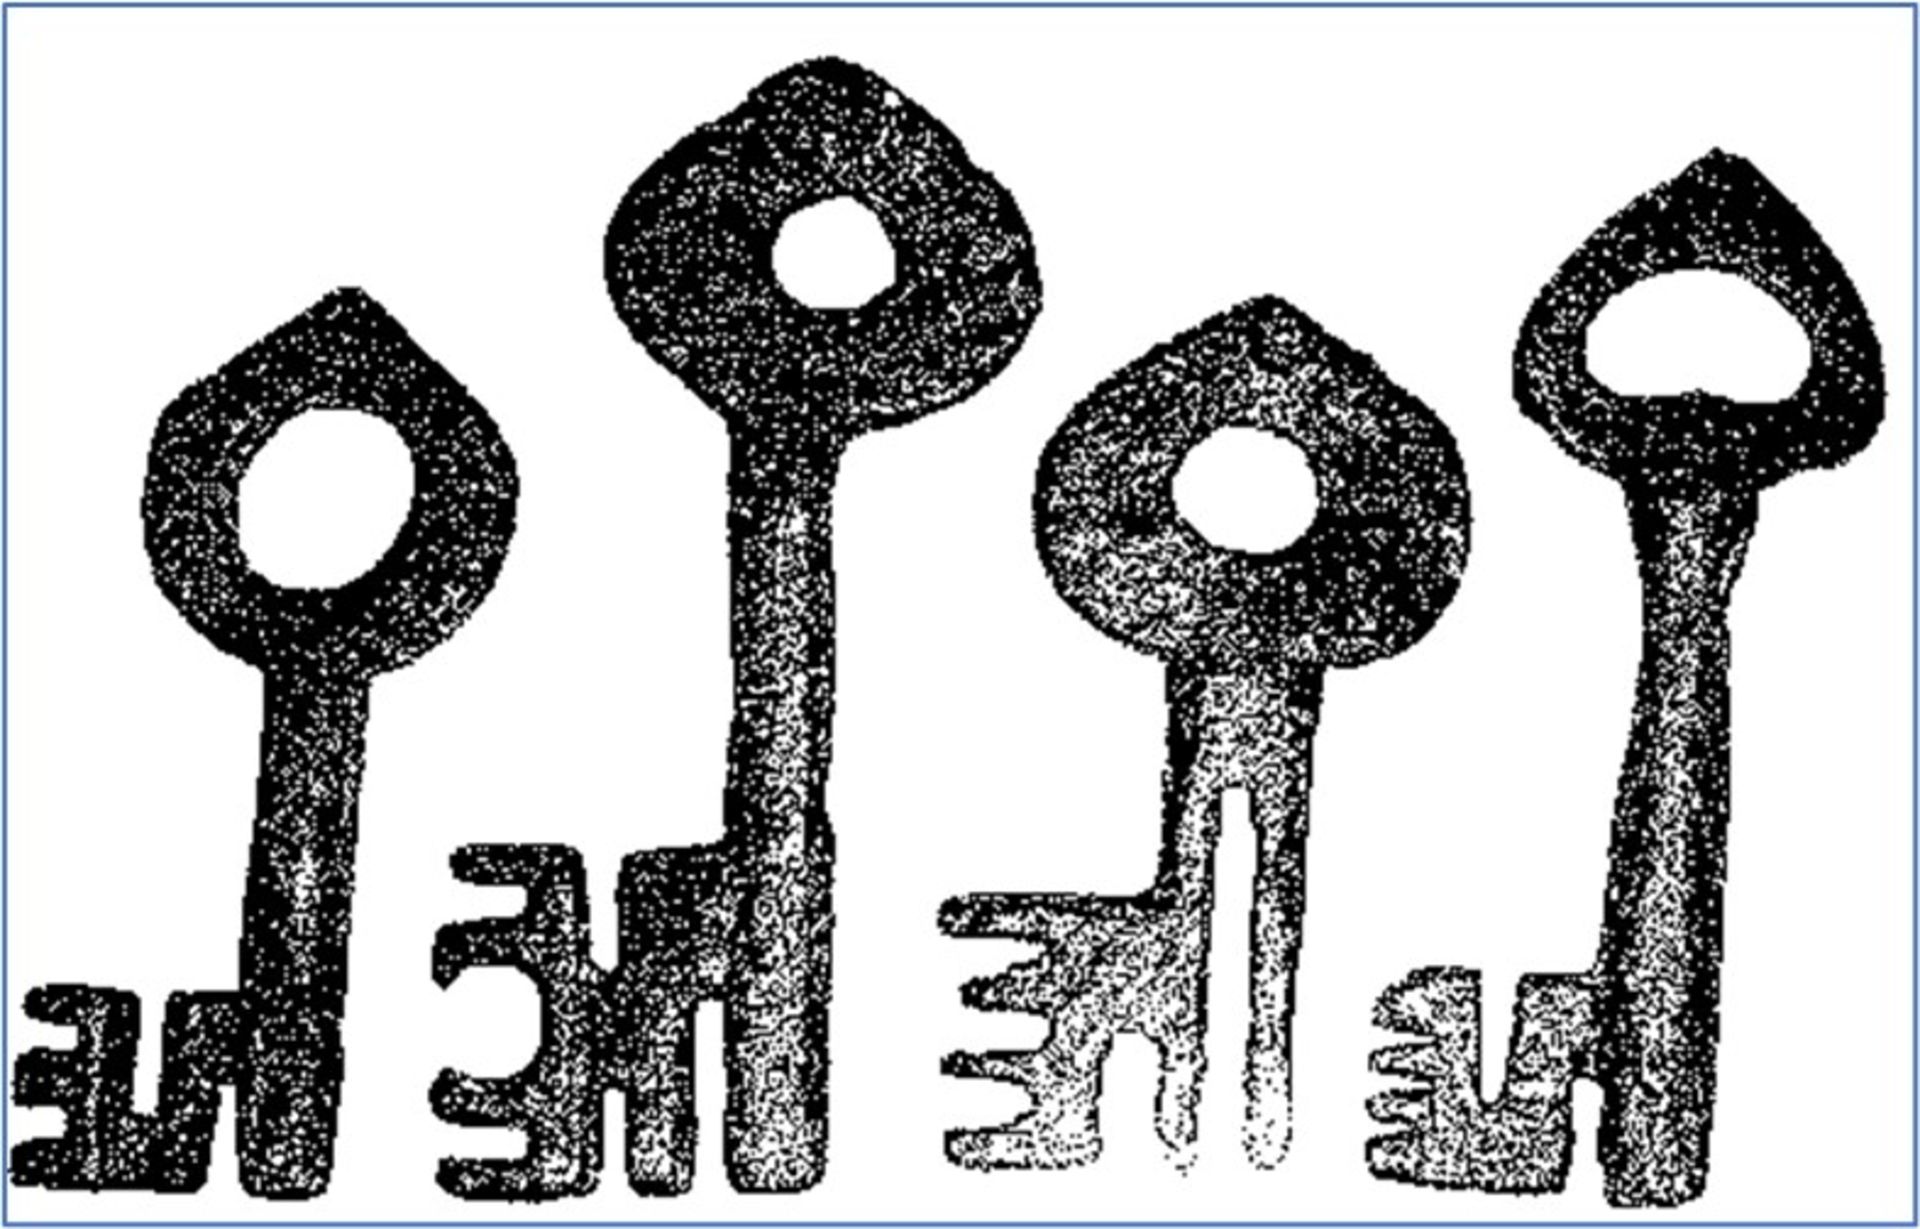 Four gothic keys5, 4 - 5, 25 - 6,34 - 6,90 cm. Part of the chapter "From the Time of the - Image 3 of 3